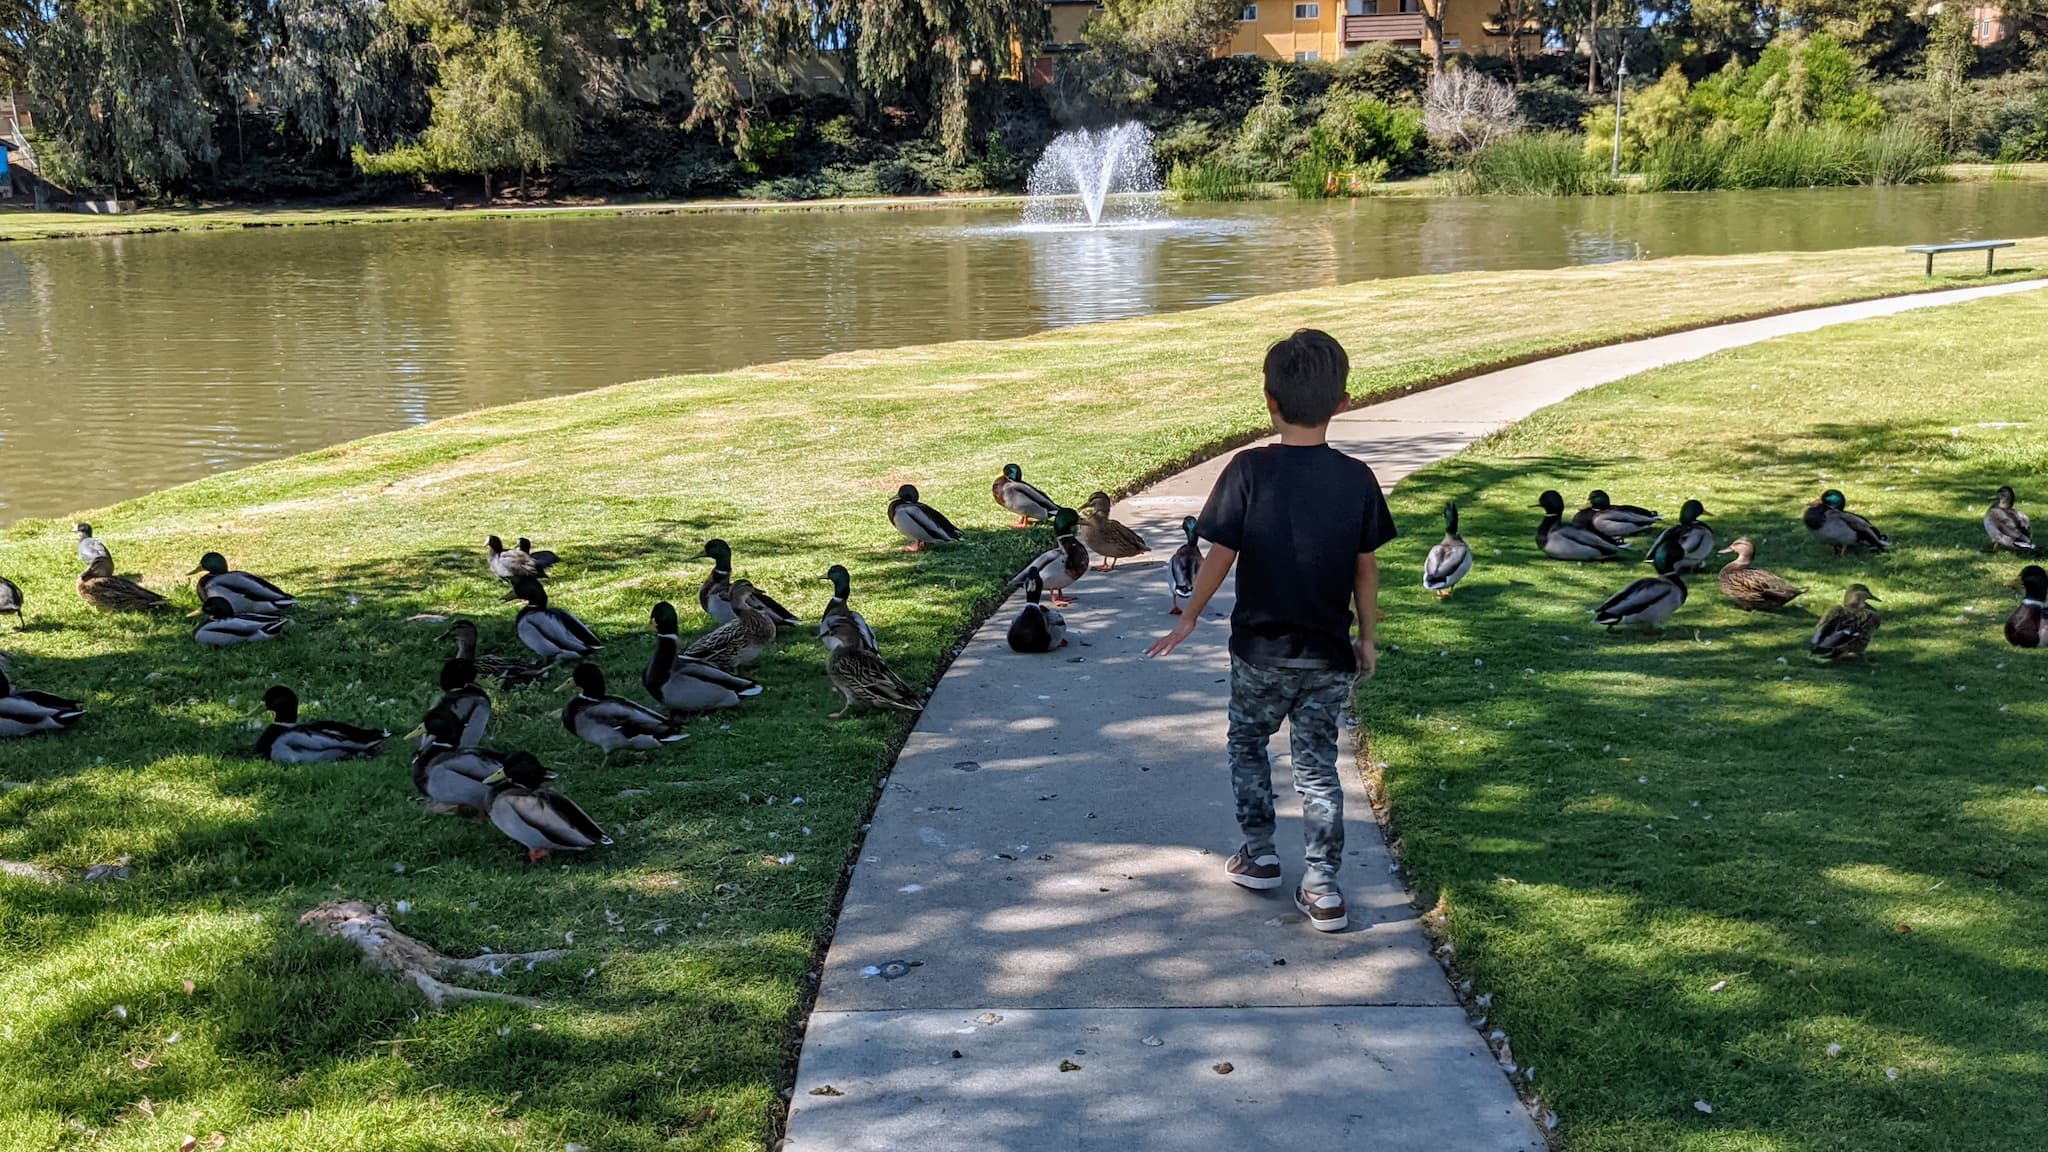 young boy walking in a park with ducks.